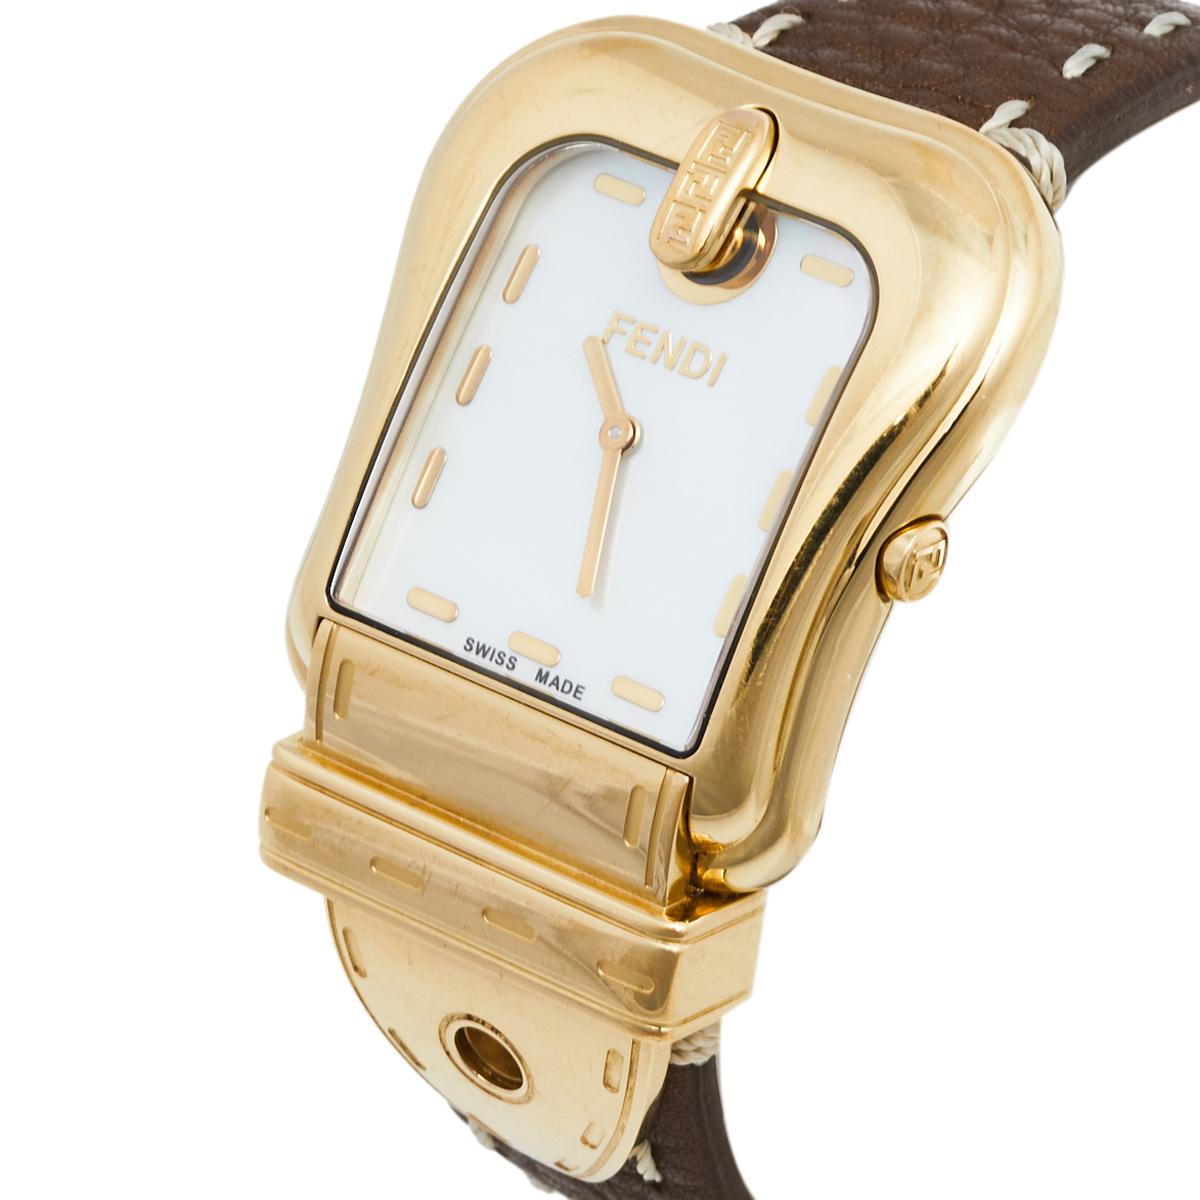 Gold Fendi Watch - 7 For Sale on 1stDibs | how much is a fendi watch worth